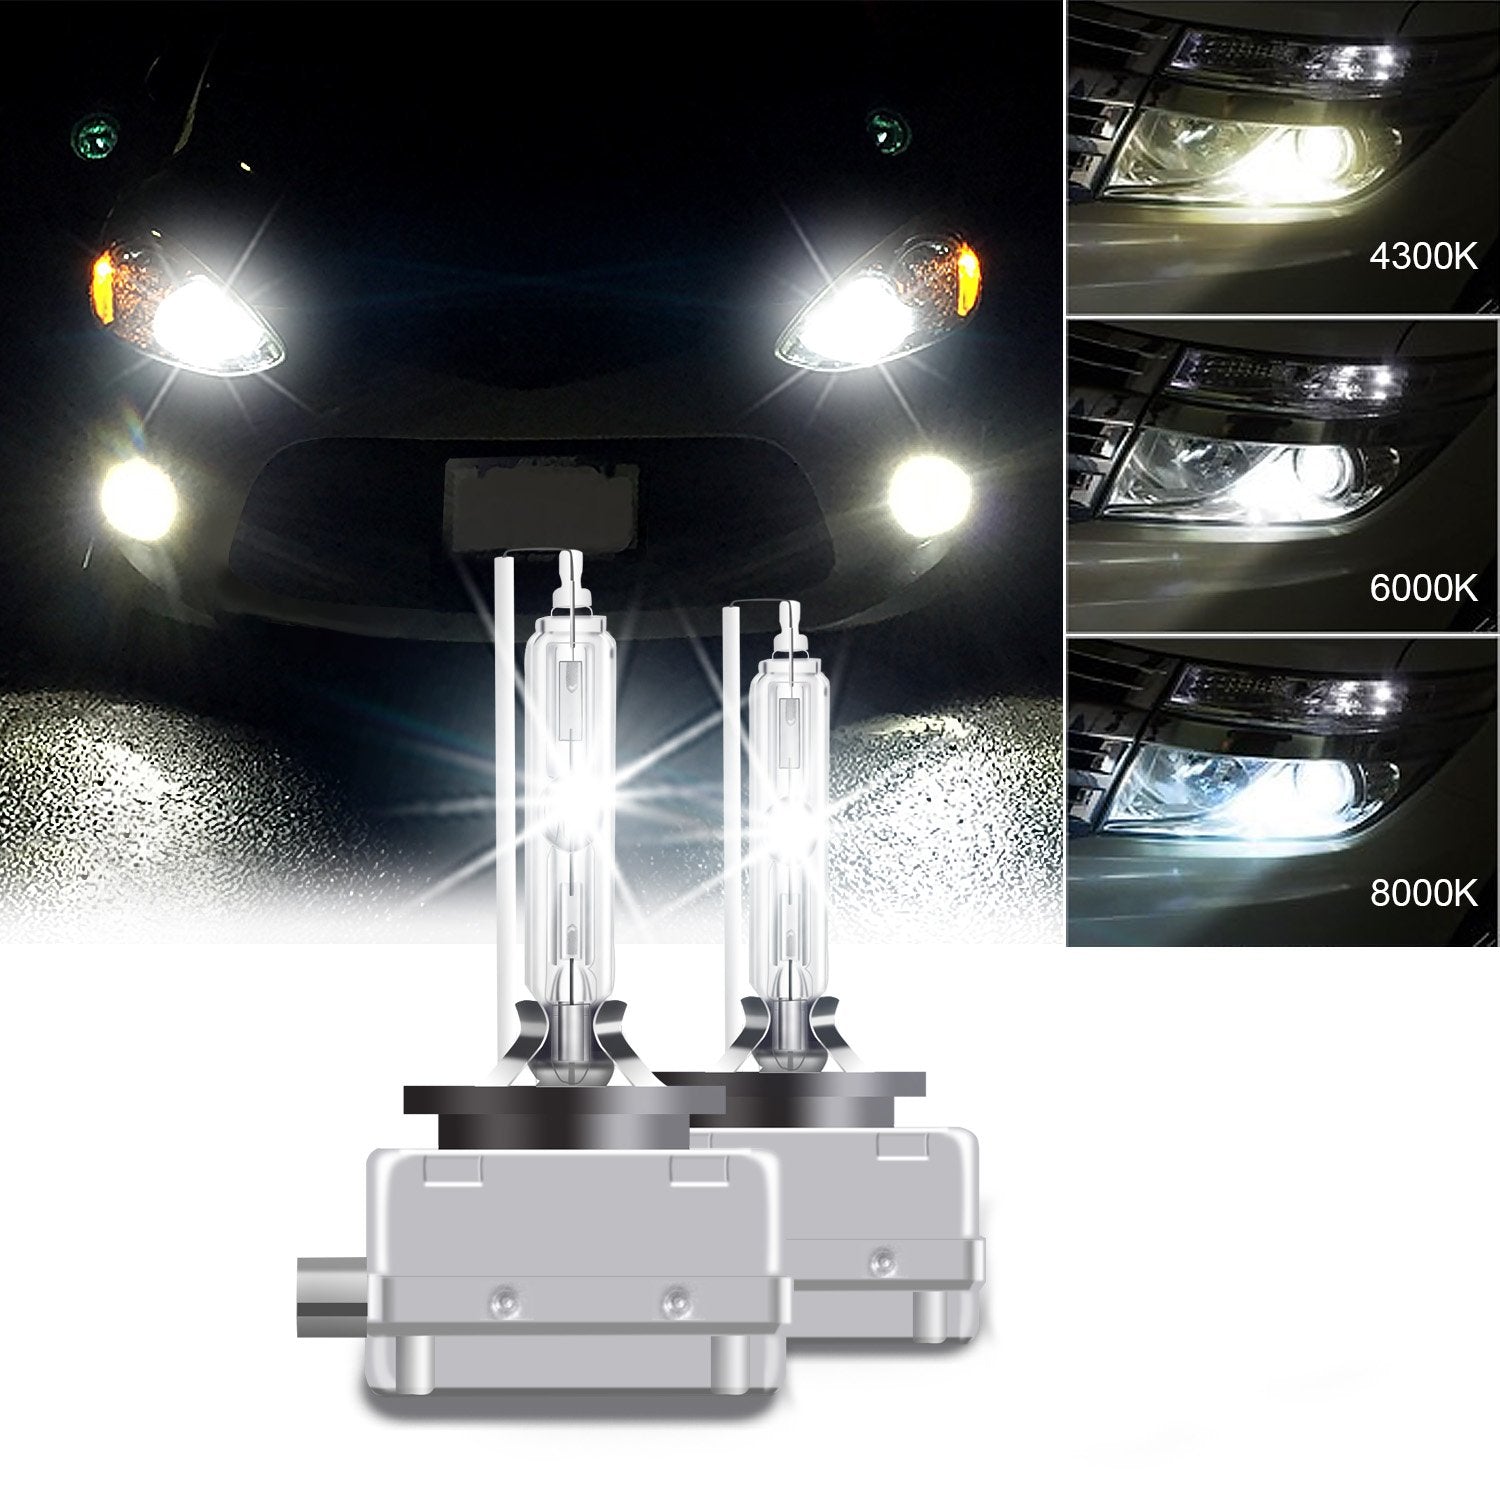 XELORD D1S Xenon HID Headlights Bulb 6000K Diamond Bright White for 12V Car  HID Headlight Replacement Bulbs 35W with Metal Stents Base - 2 Pack